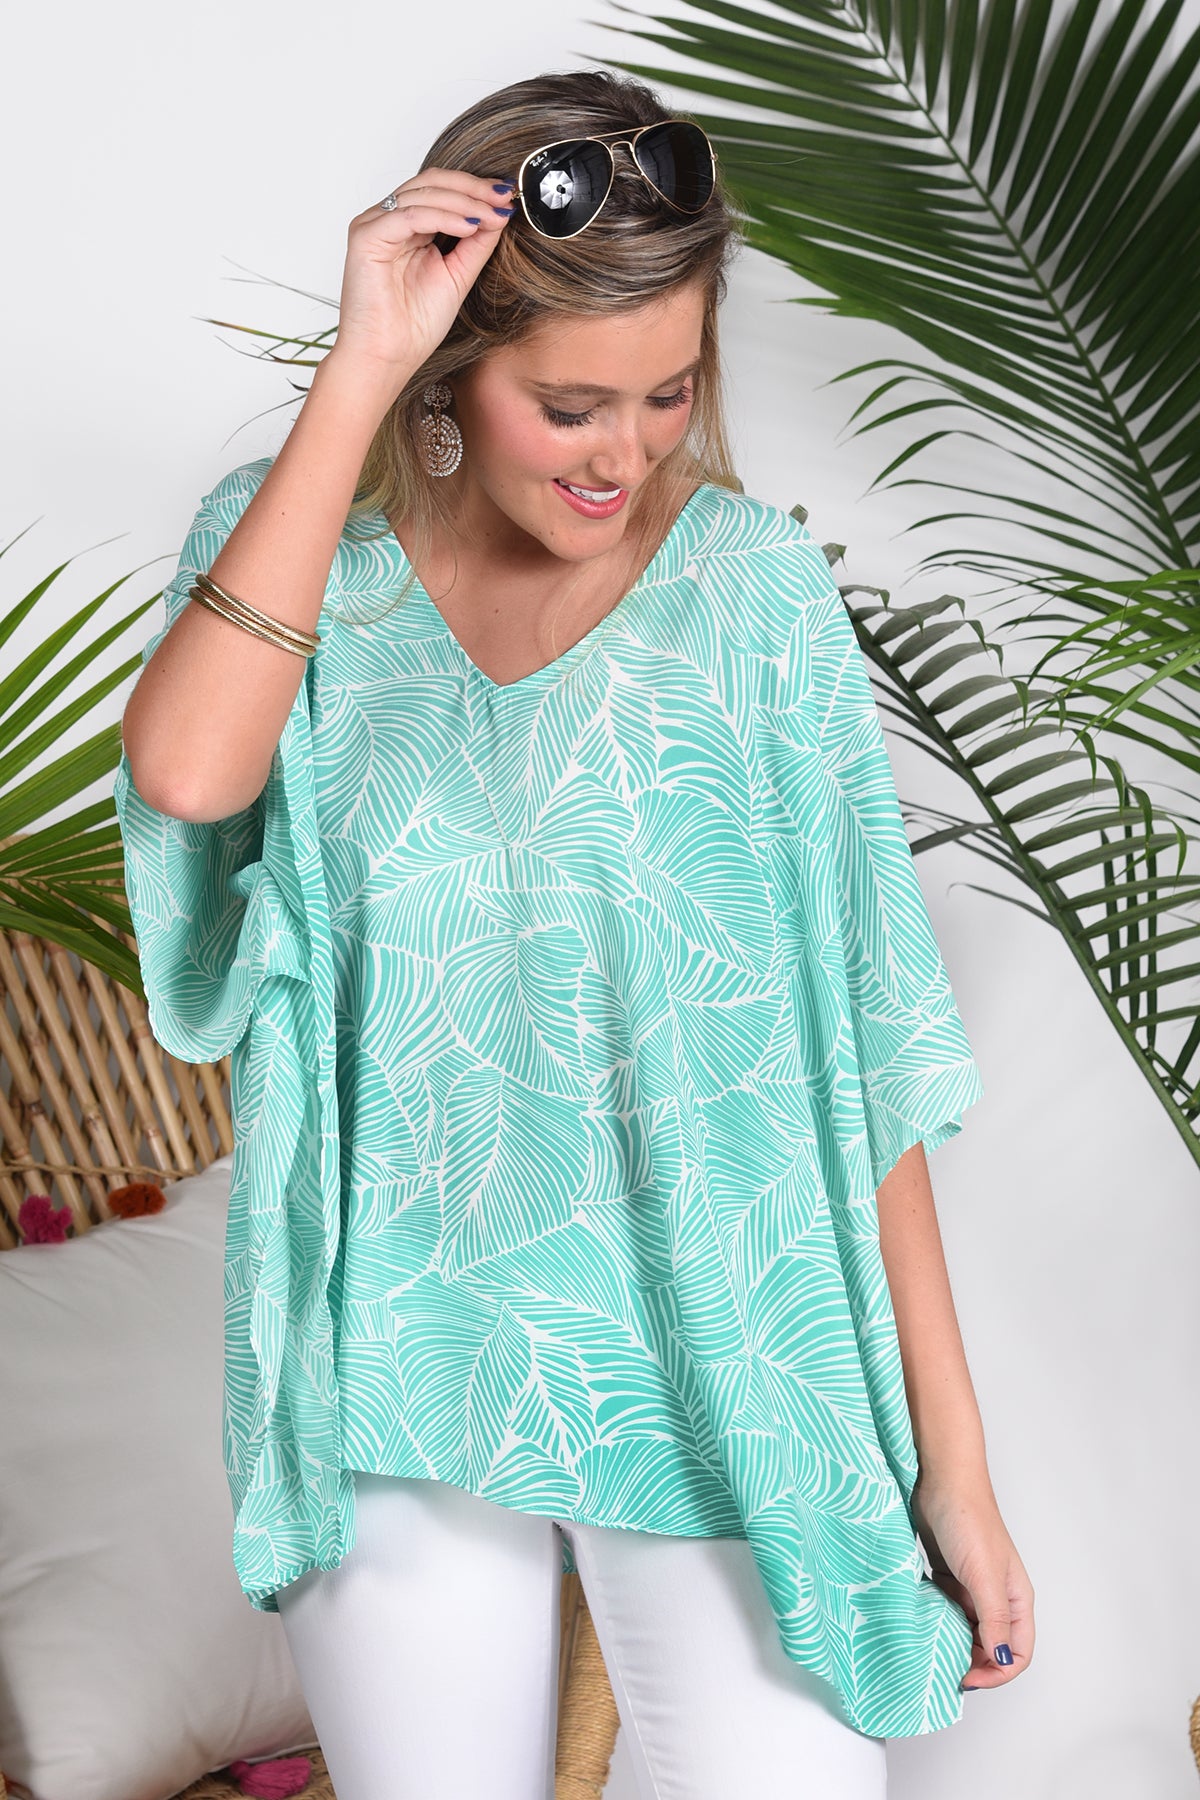 WE'RE MINT TO BE TOGETHER TOP - Dear Stella Boutique